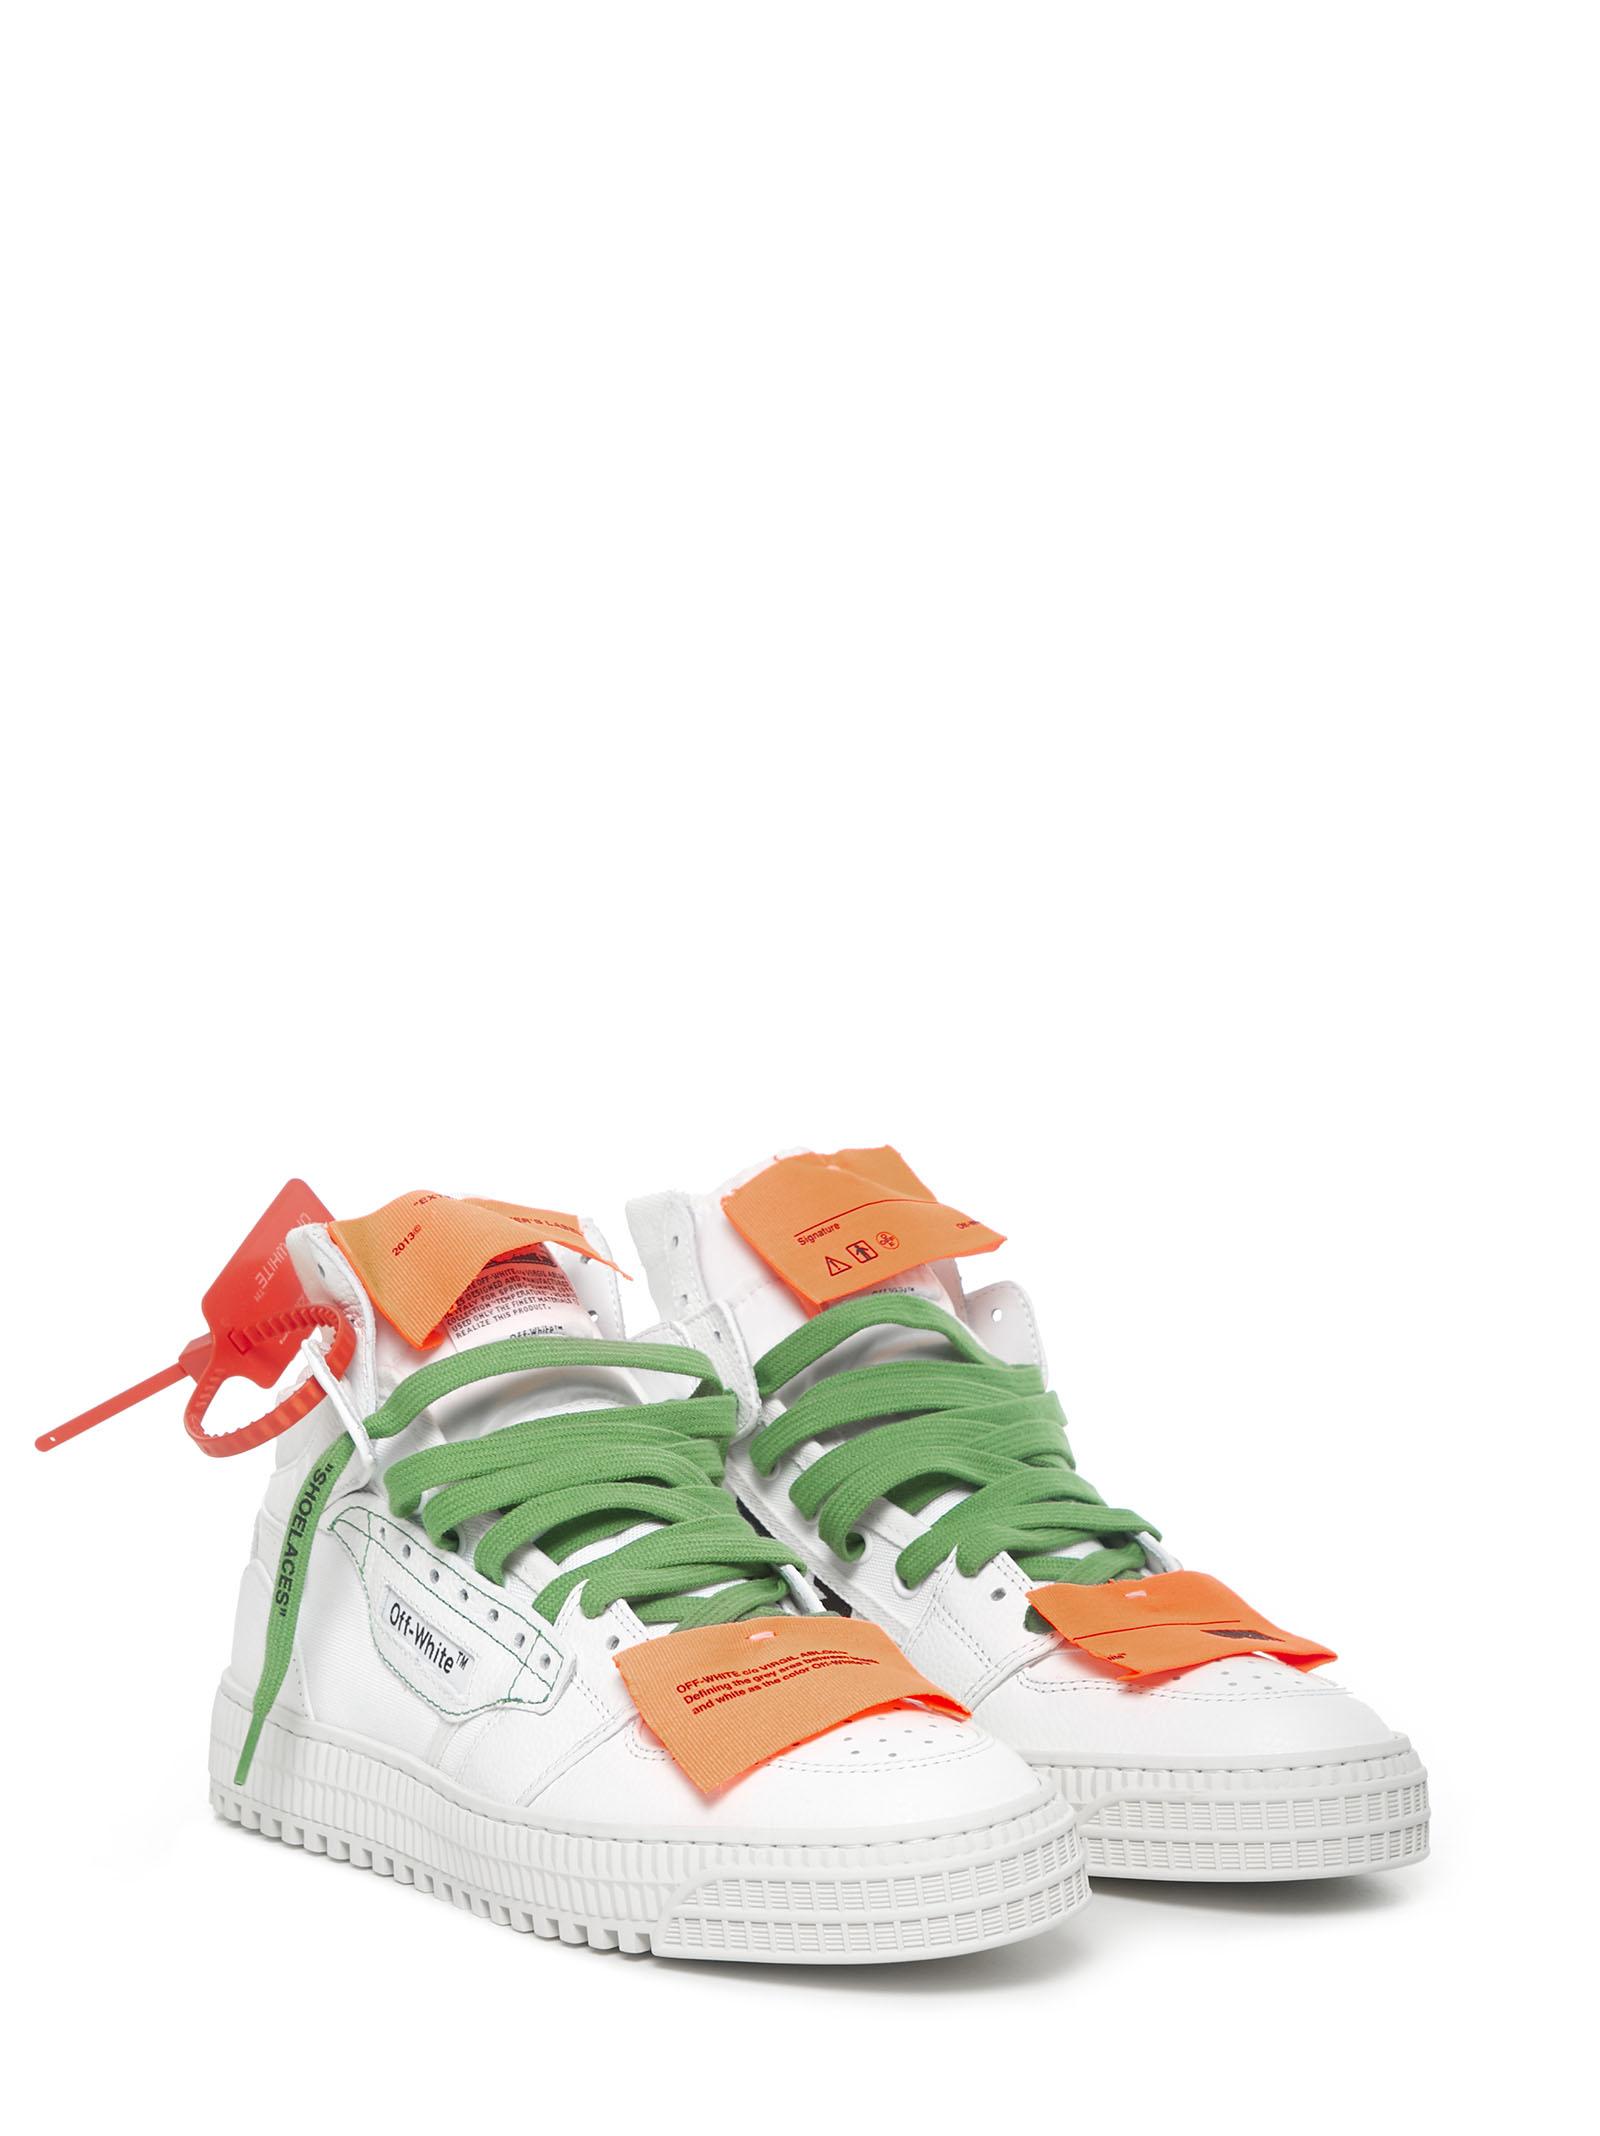 Off-White c/o Virgil Abloh *icon Off-court 3.0 White High Top Sneakers In  Leather And Canvas With Orange Label On The Tip. - Save 36% - Lyst